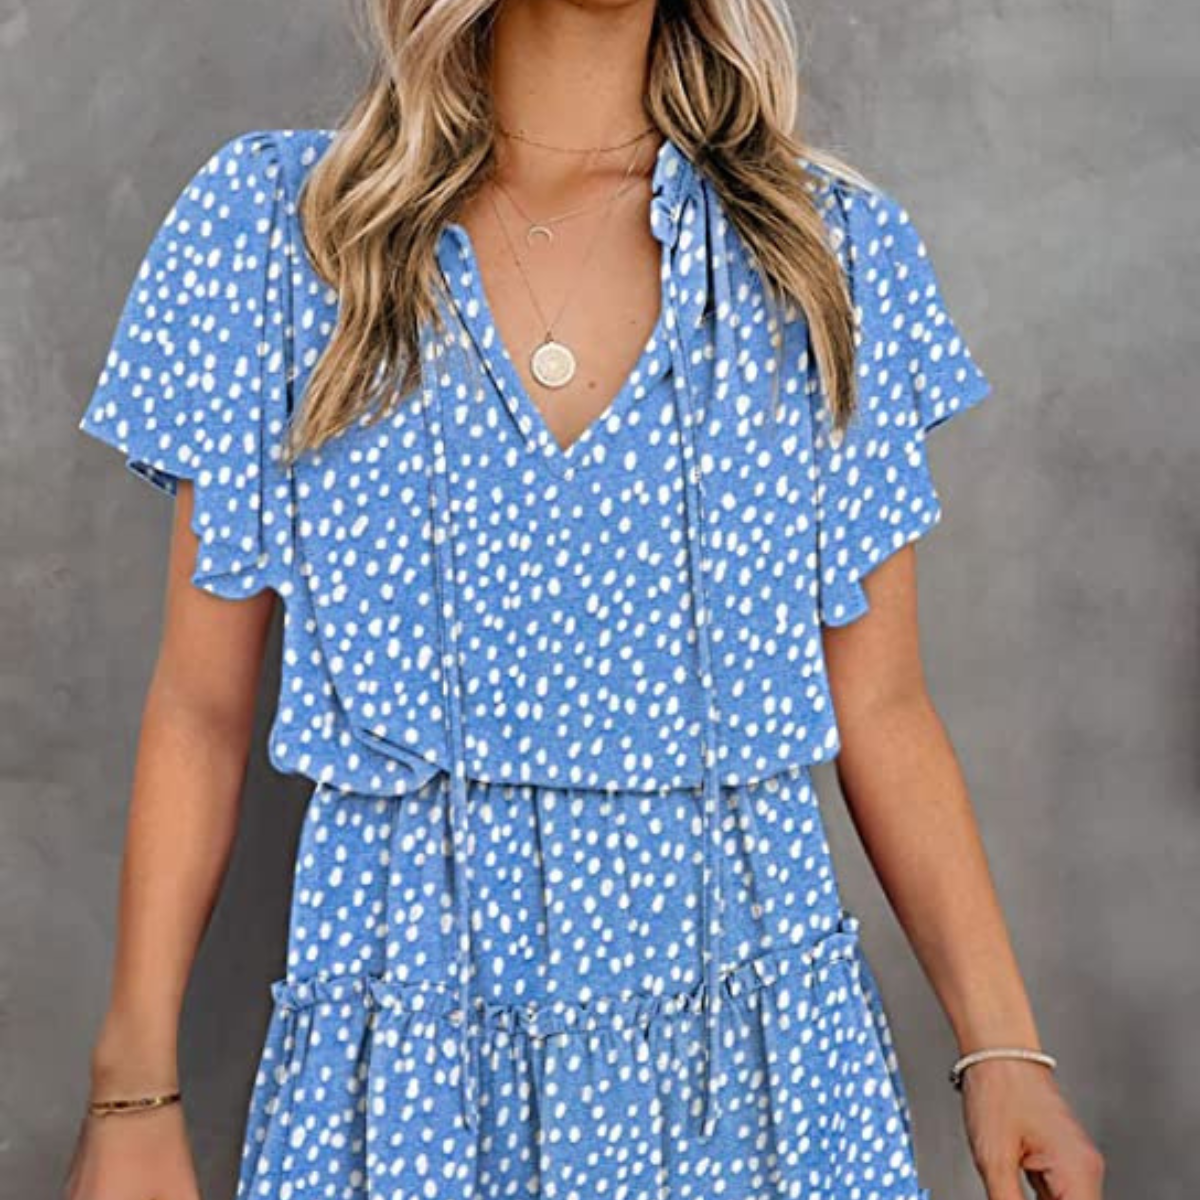 Flowy, Flowery, Absolutely Stunning Sun Dresses That Are Guaranteed Crowd Pleasers